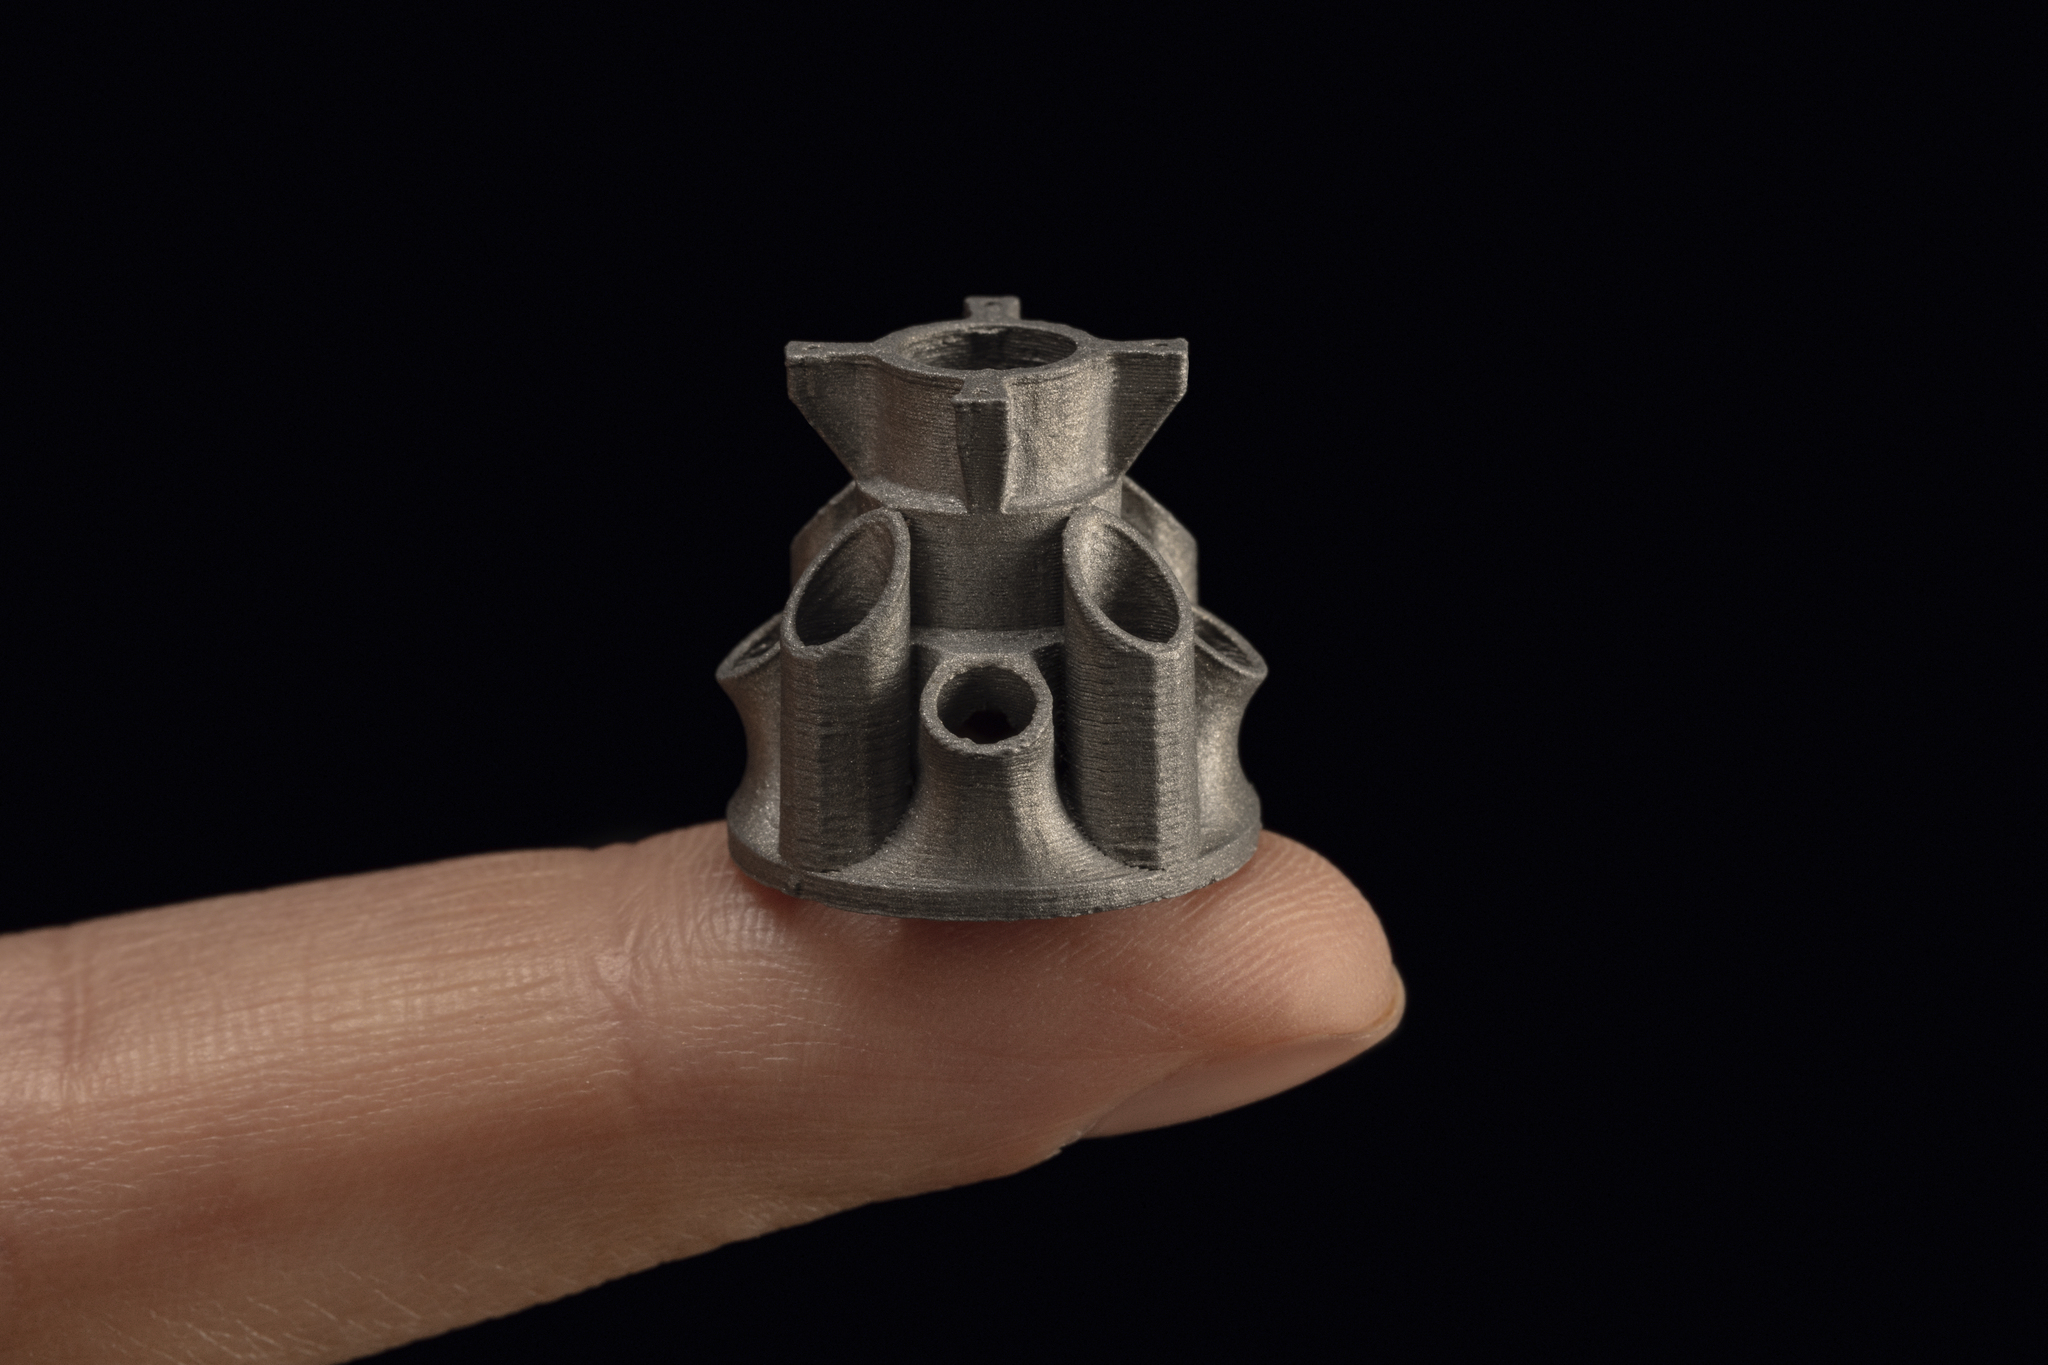 A complex metal part the size of a fingertip 3D printed on the Studio System+. Photo via Desktop Metal.